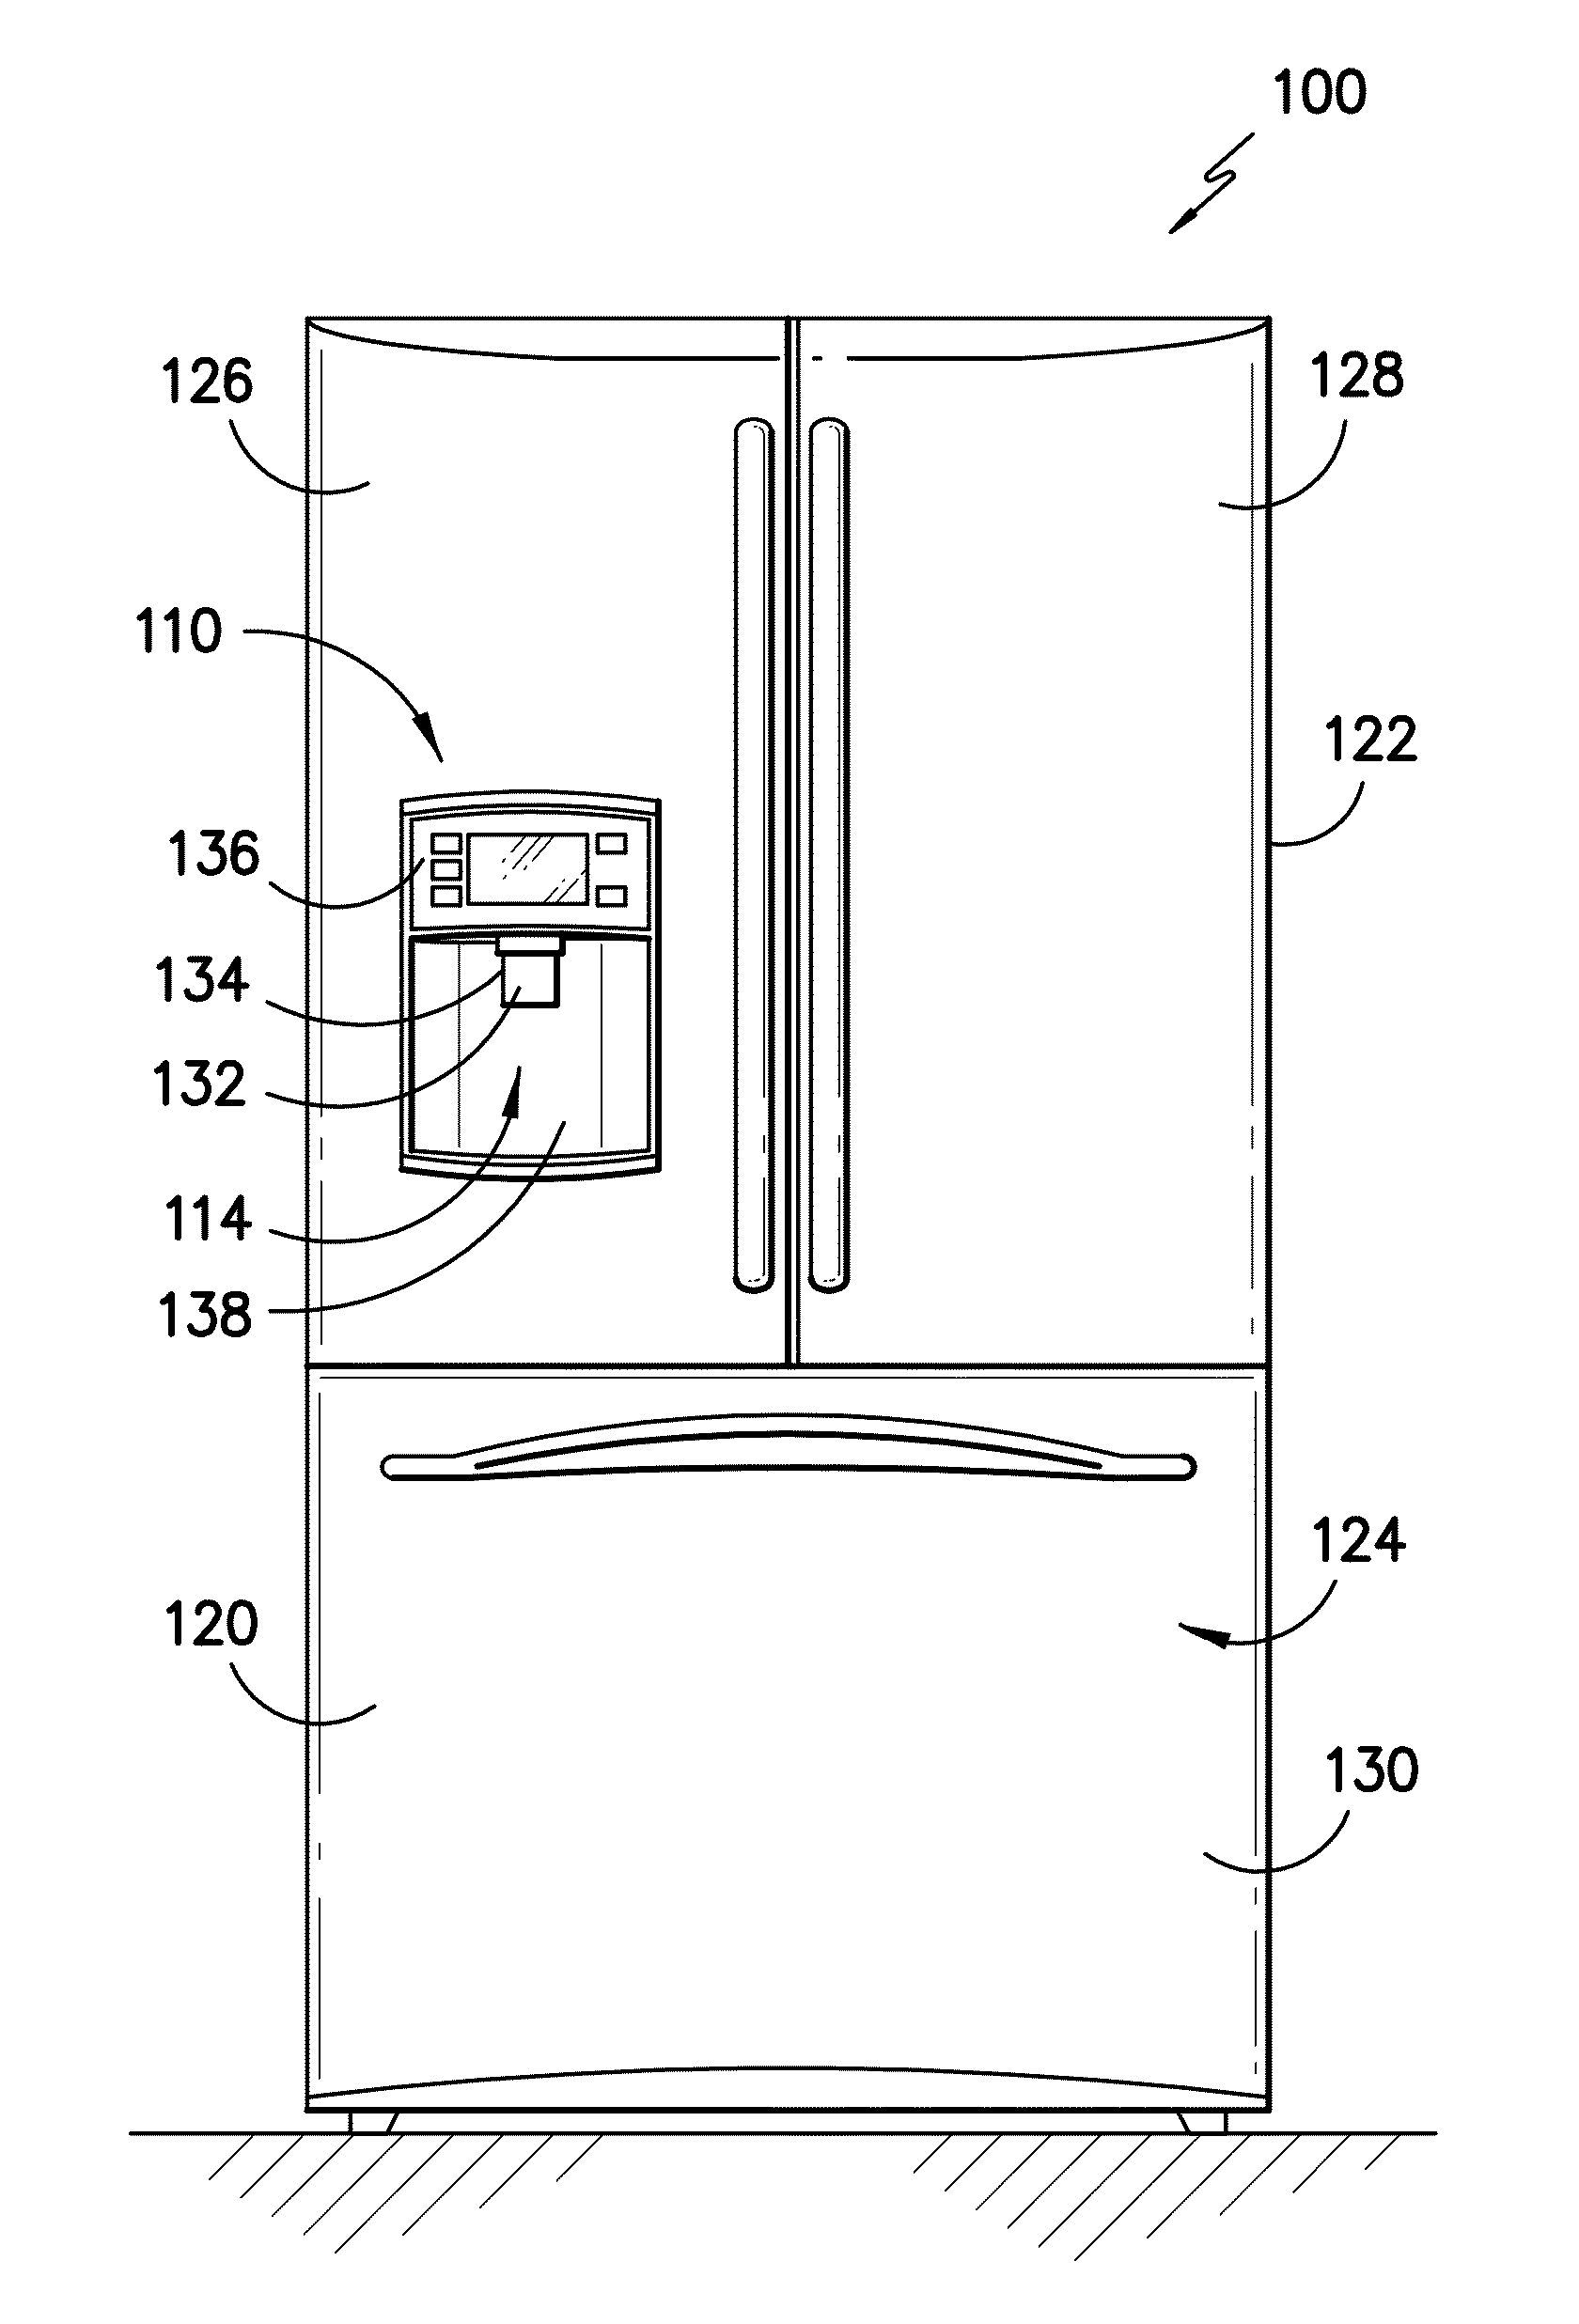 Ice dispenser with crusher for a refrigerator appliance